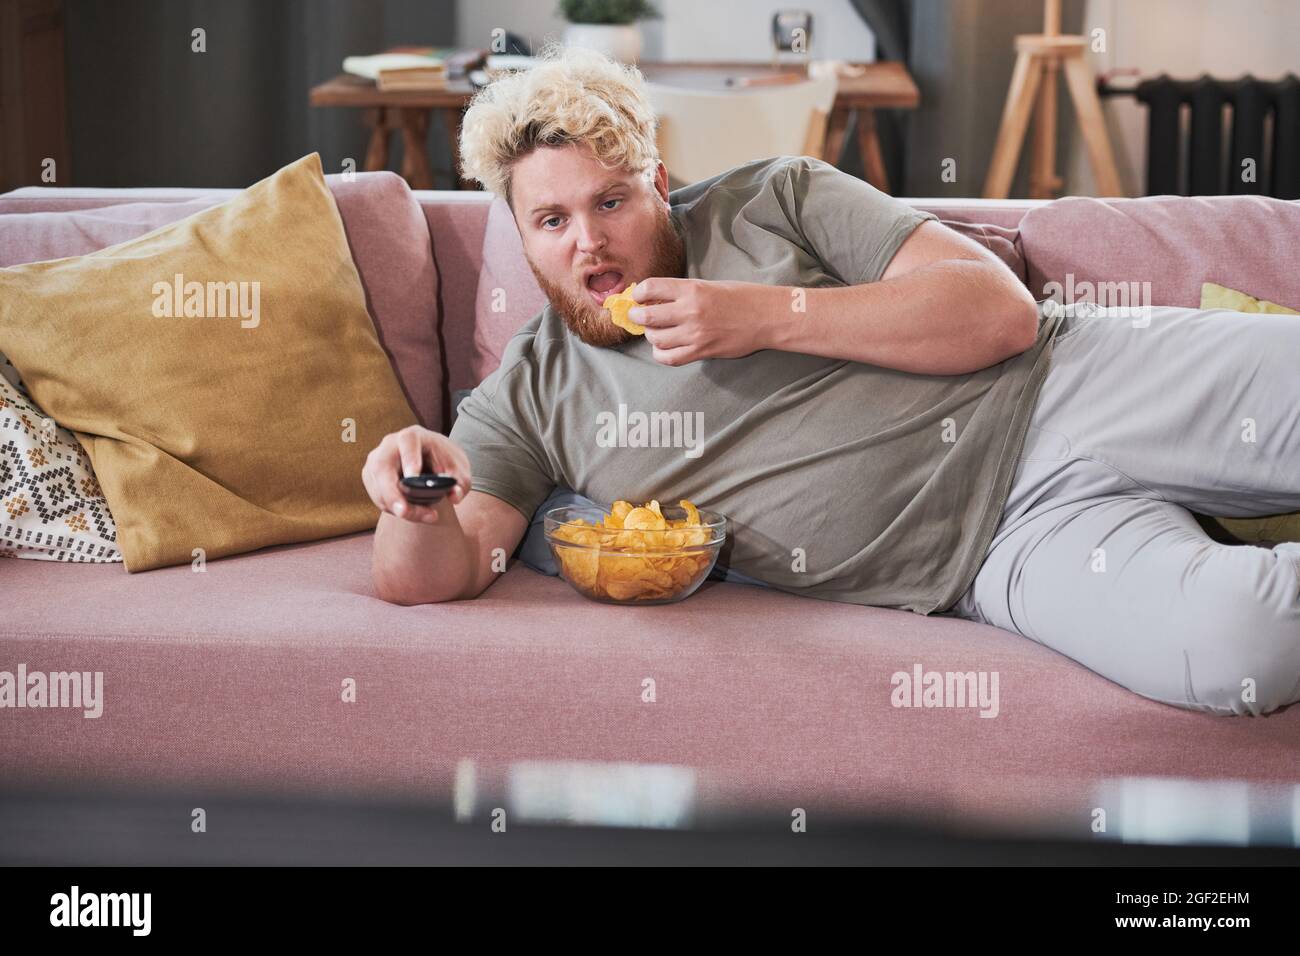 Lazy Overweight Man Lying On The Sofa Eating Chips And Watching Tv At